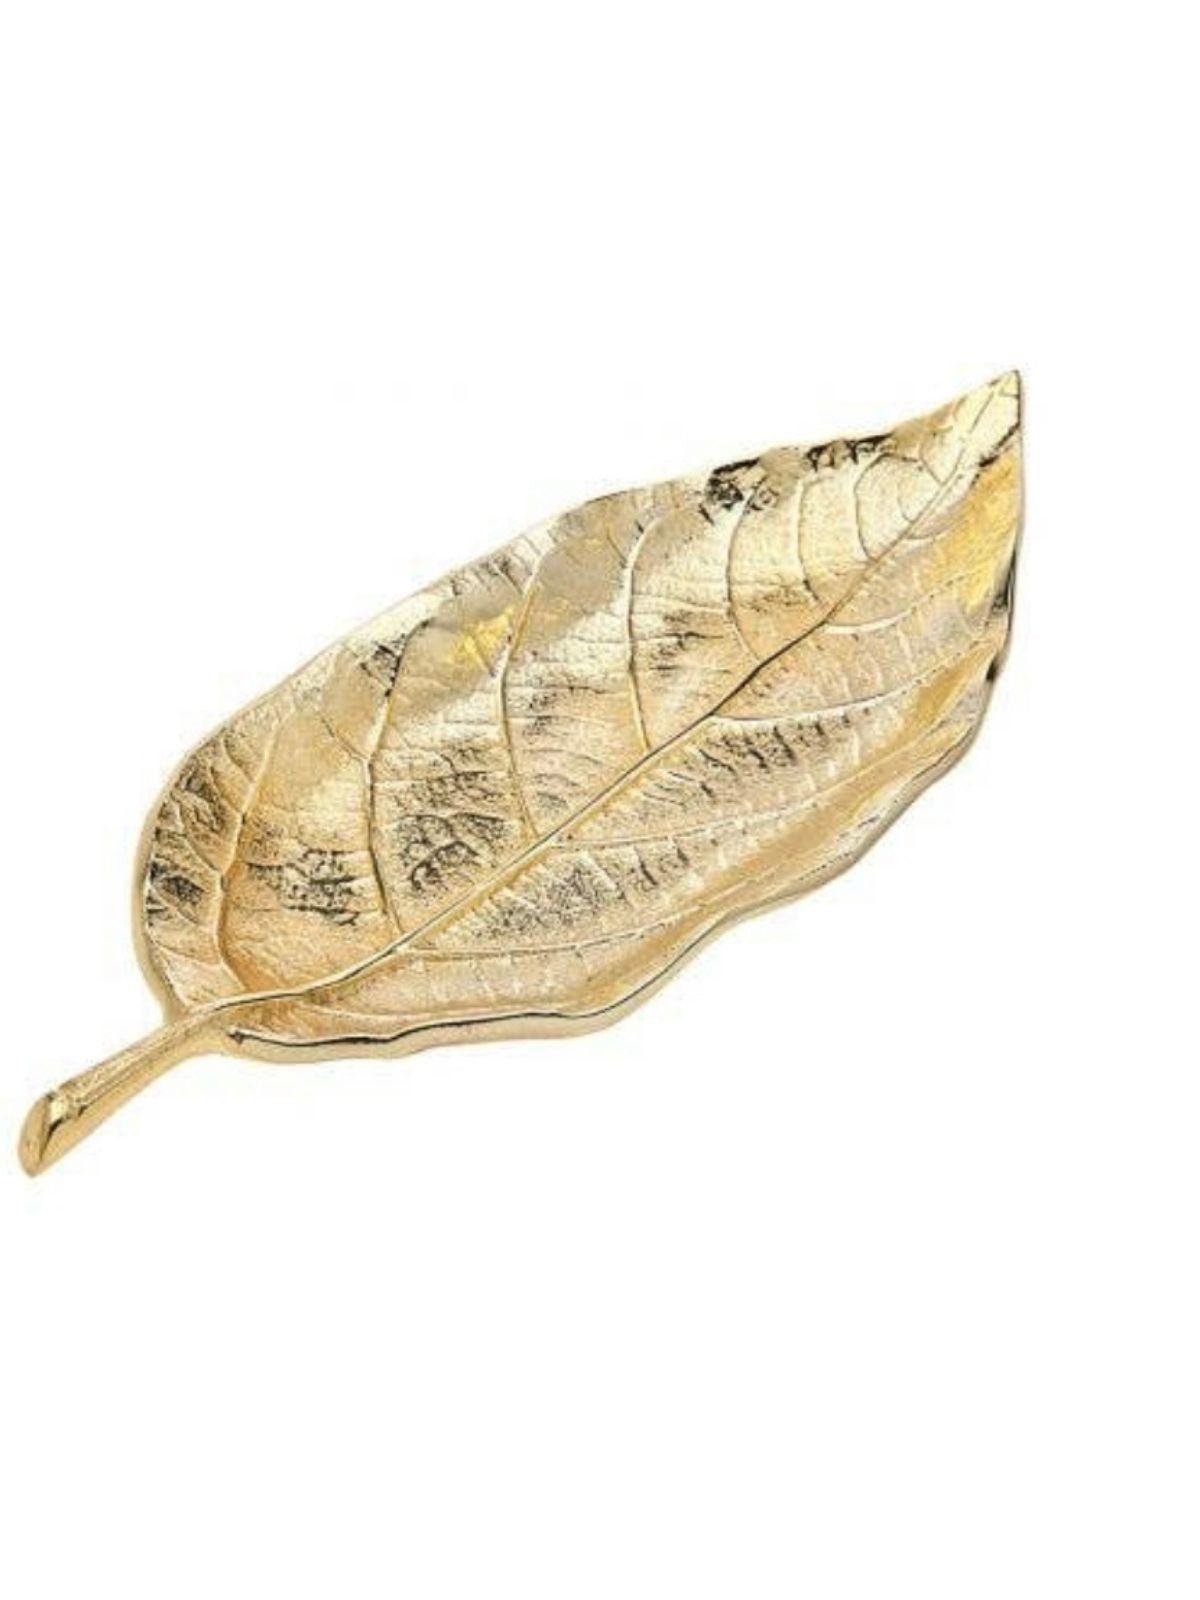 This elegant & Chic Leaf Accent Tray can be used for serving, buffet or as a decorative accent. Beautiful addition to any décor!